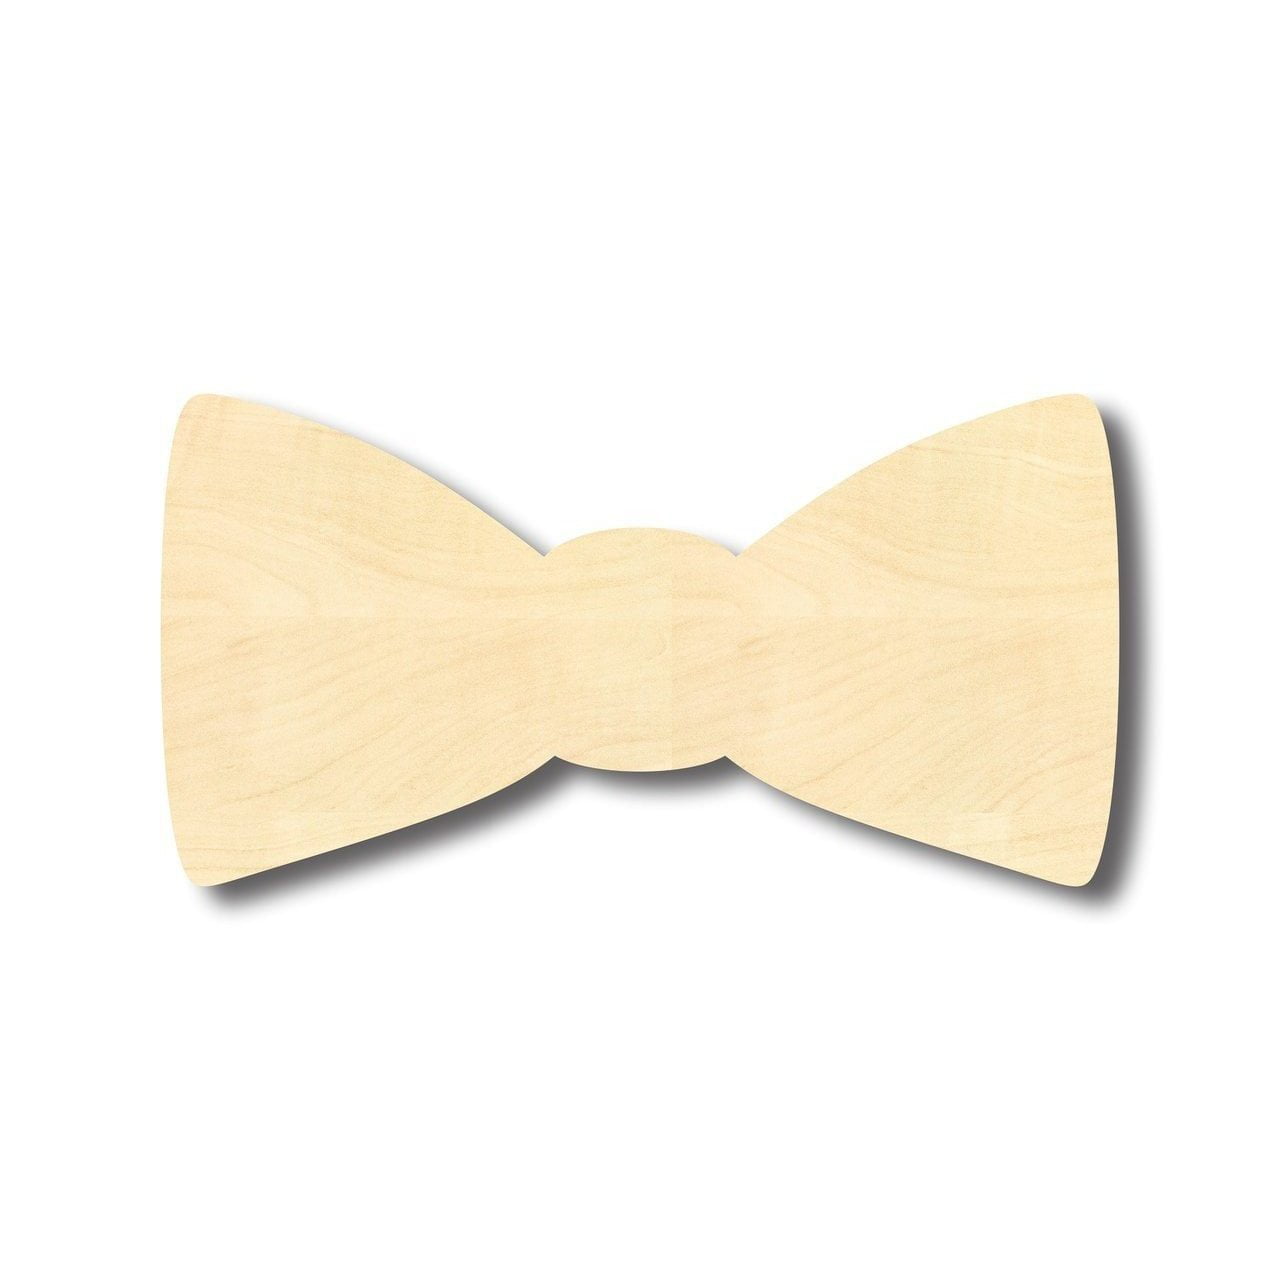 Wood Sewing Scrapbook DIY THE BOW TIE BIG Button 1.25 inches long 1 Hole 